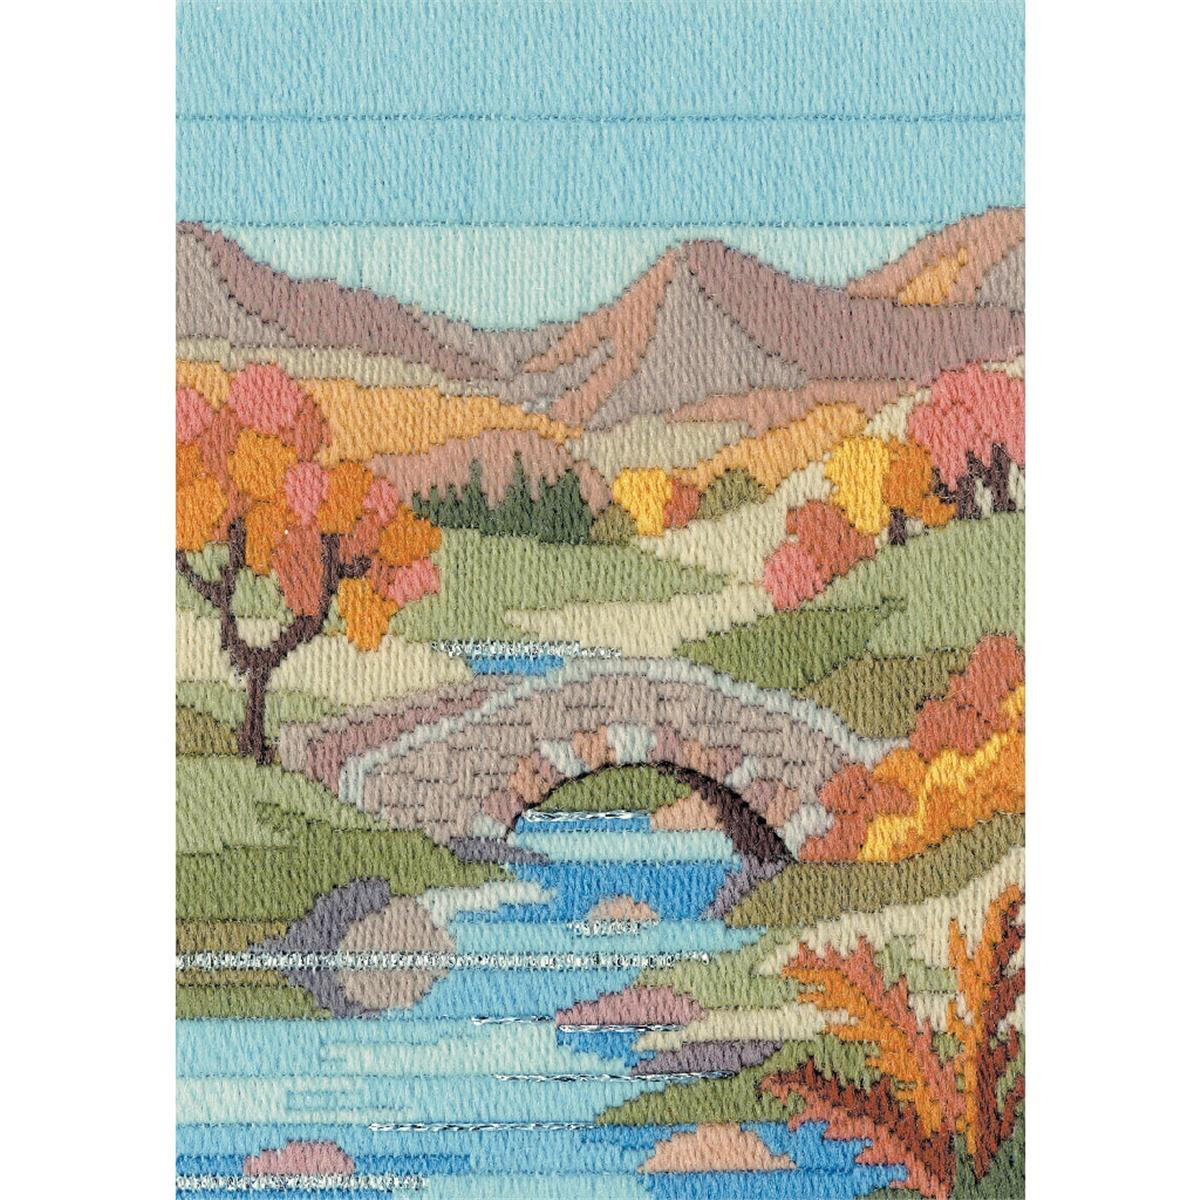 An elegant embroidery pack landscape from Bothy Threads...